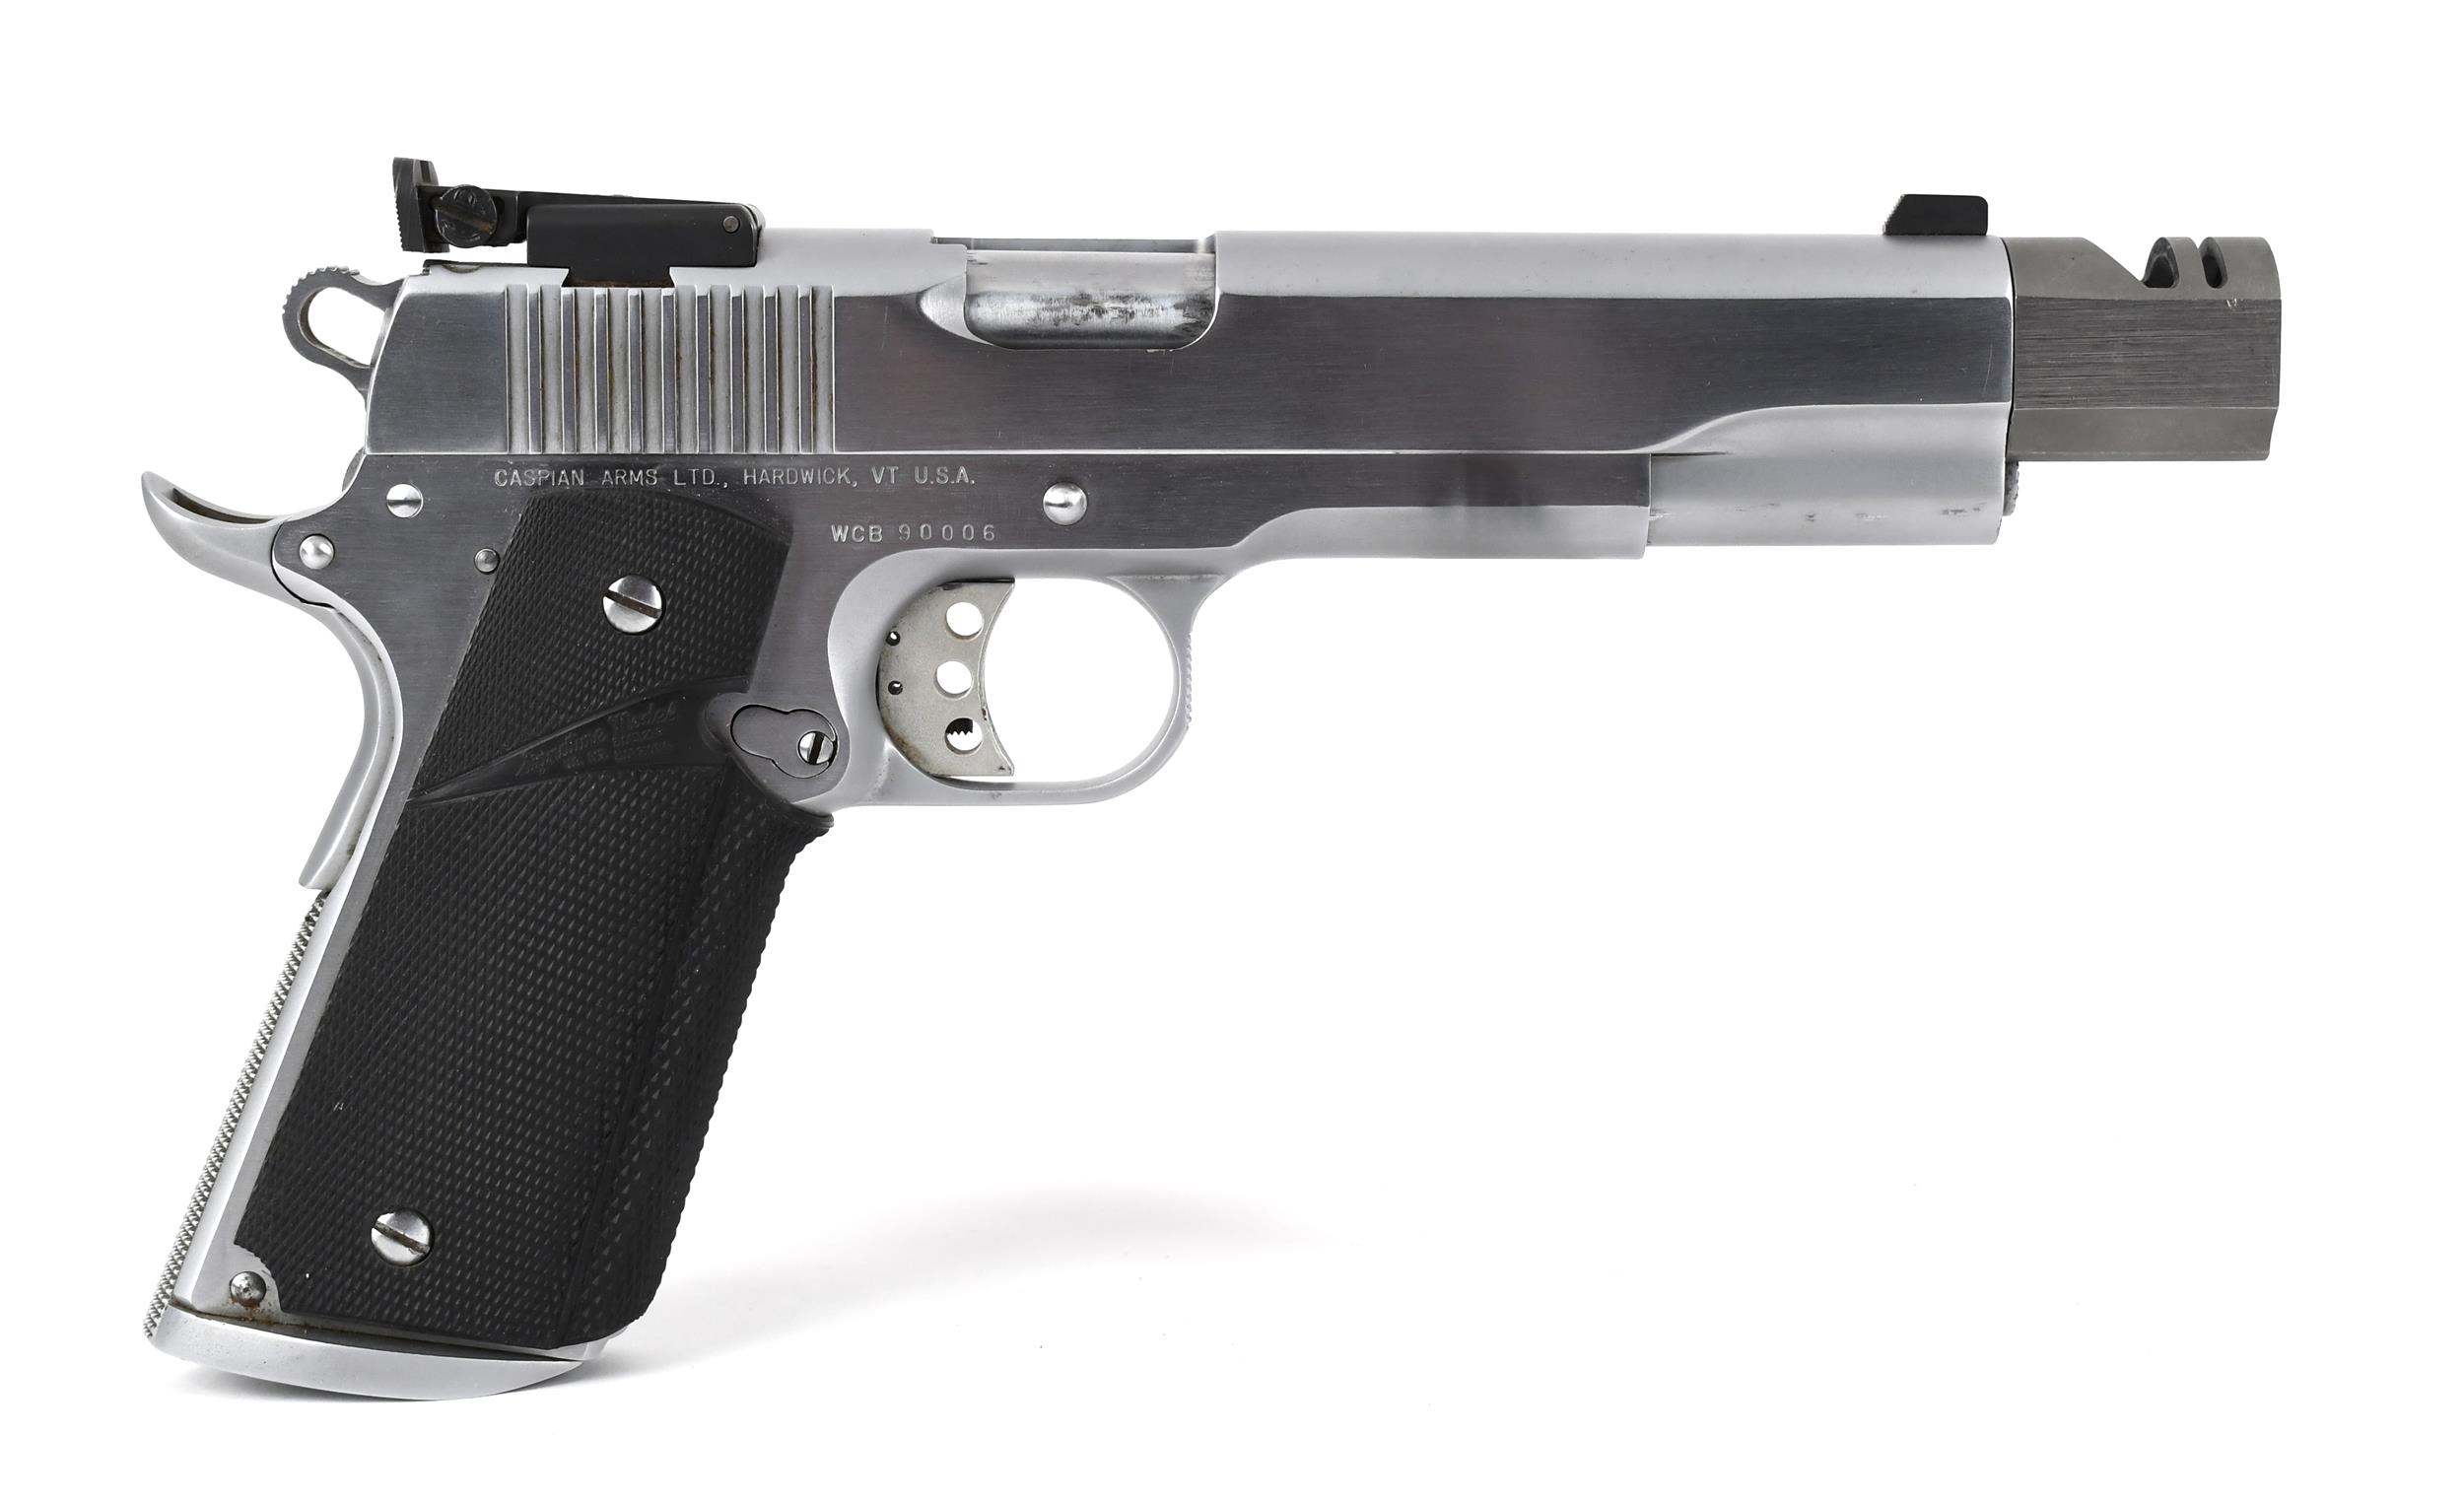 CASPIAN ARMS 1911 WITH A GLADES 3b05c2